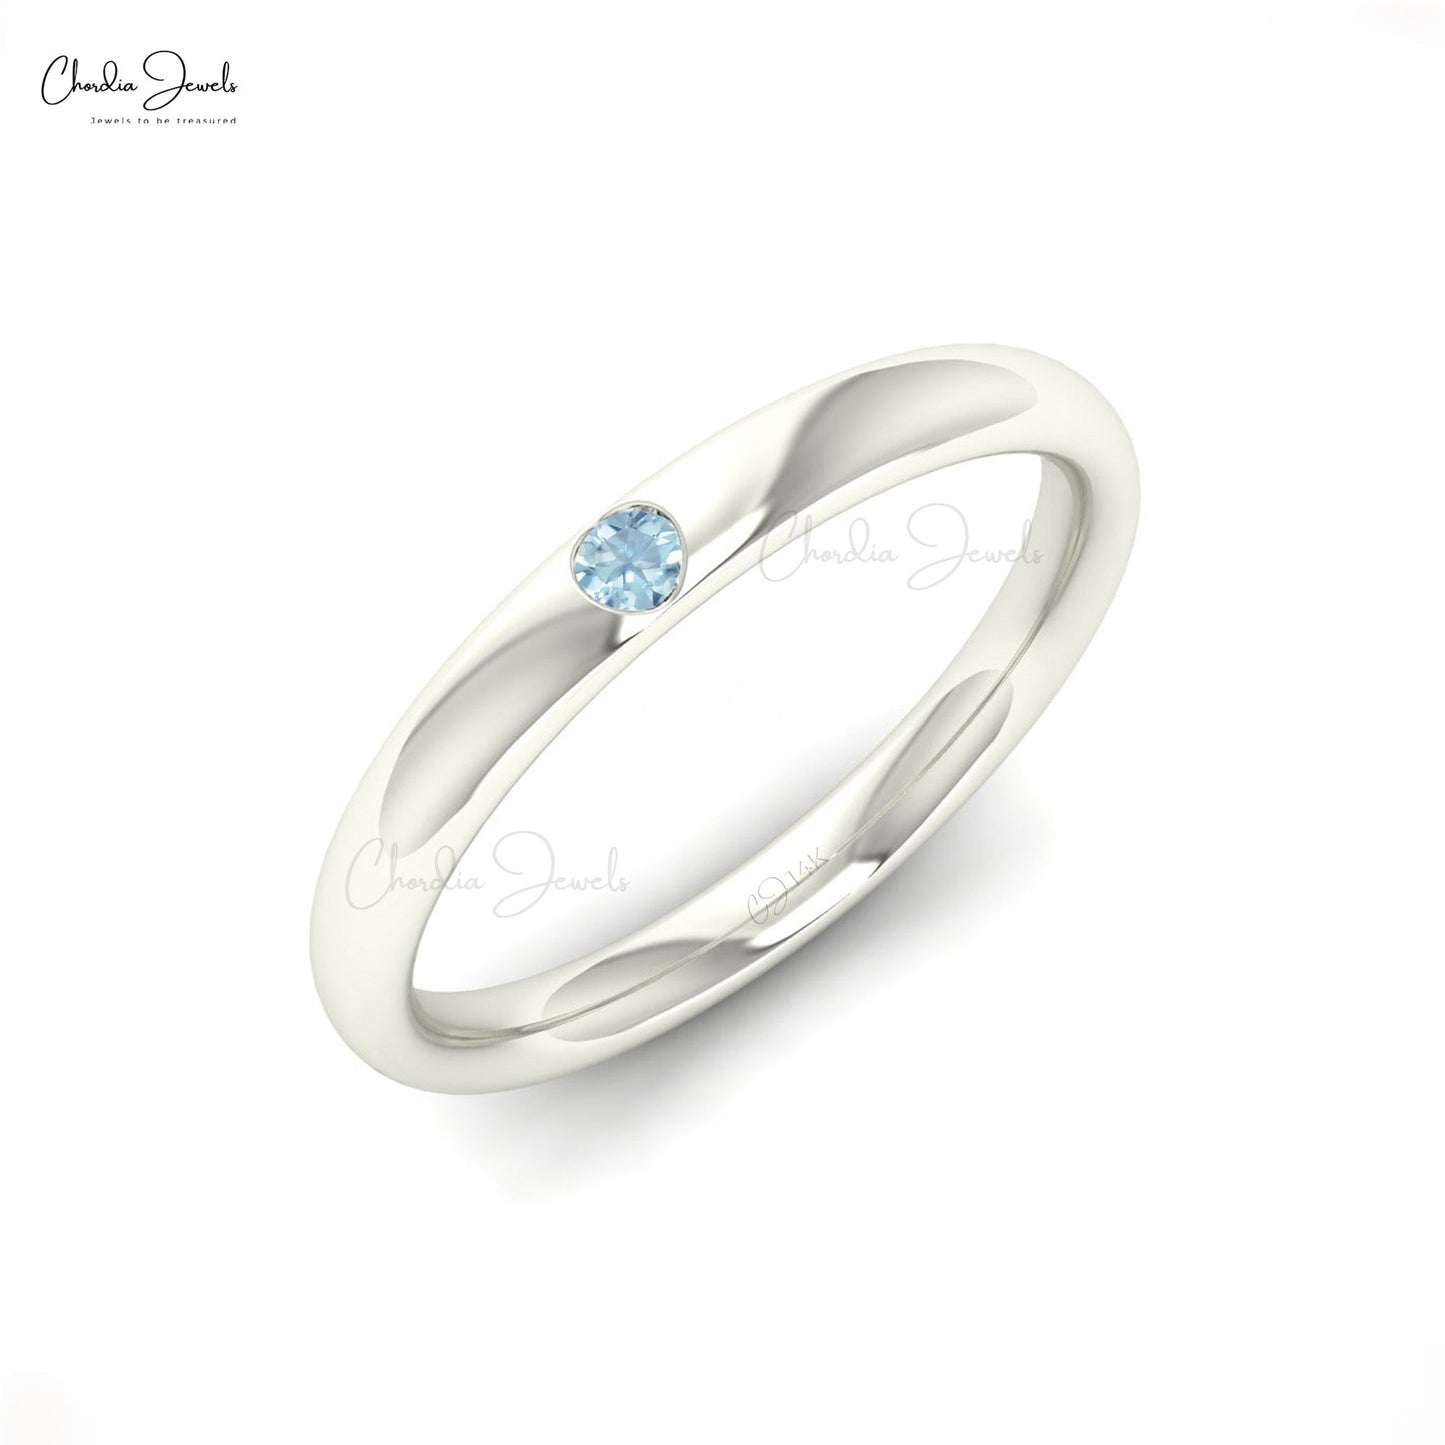 Load image into Gallery viewer, Aquamarine Stone Ring
